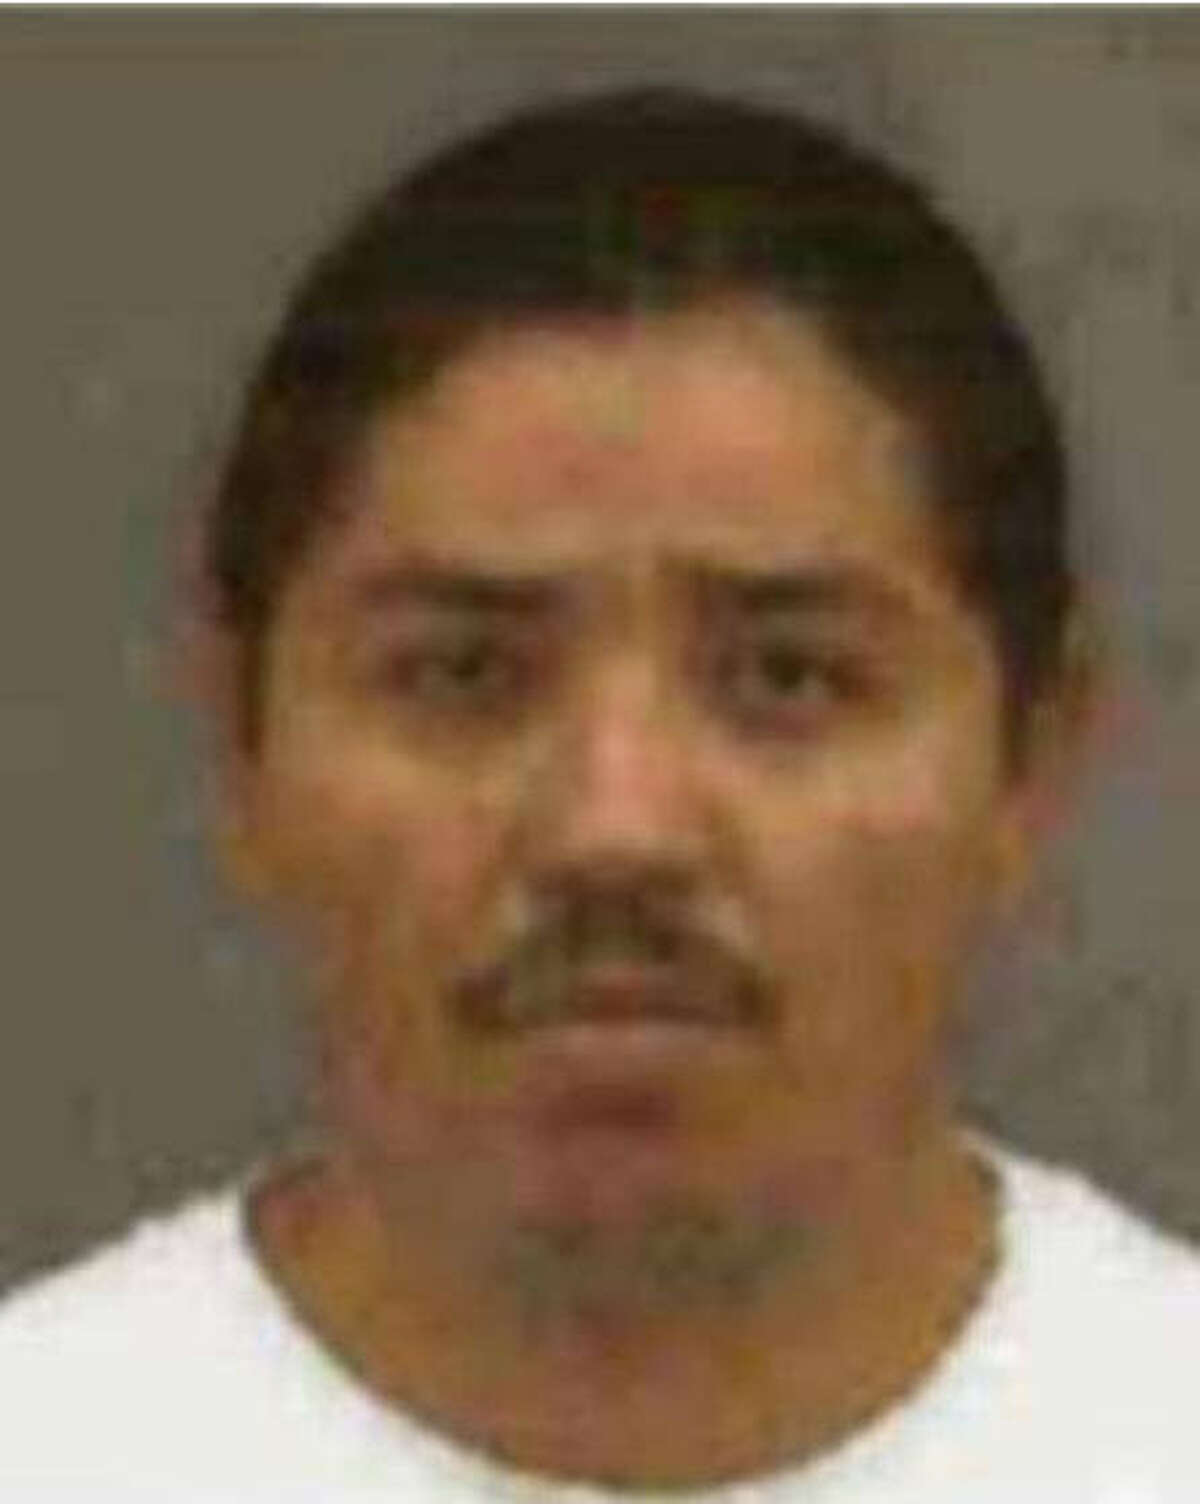 Little seen Eduardo Ravelo, described by the FBI as a dangerous gang member, has been little seen in recent years. He's wanted for murder, drug trafficking and a variety of crimes. He's pictured above in a photo from 1998.